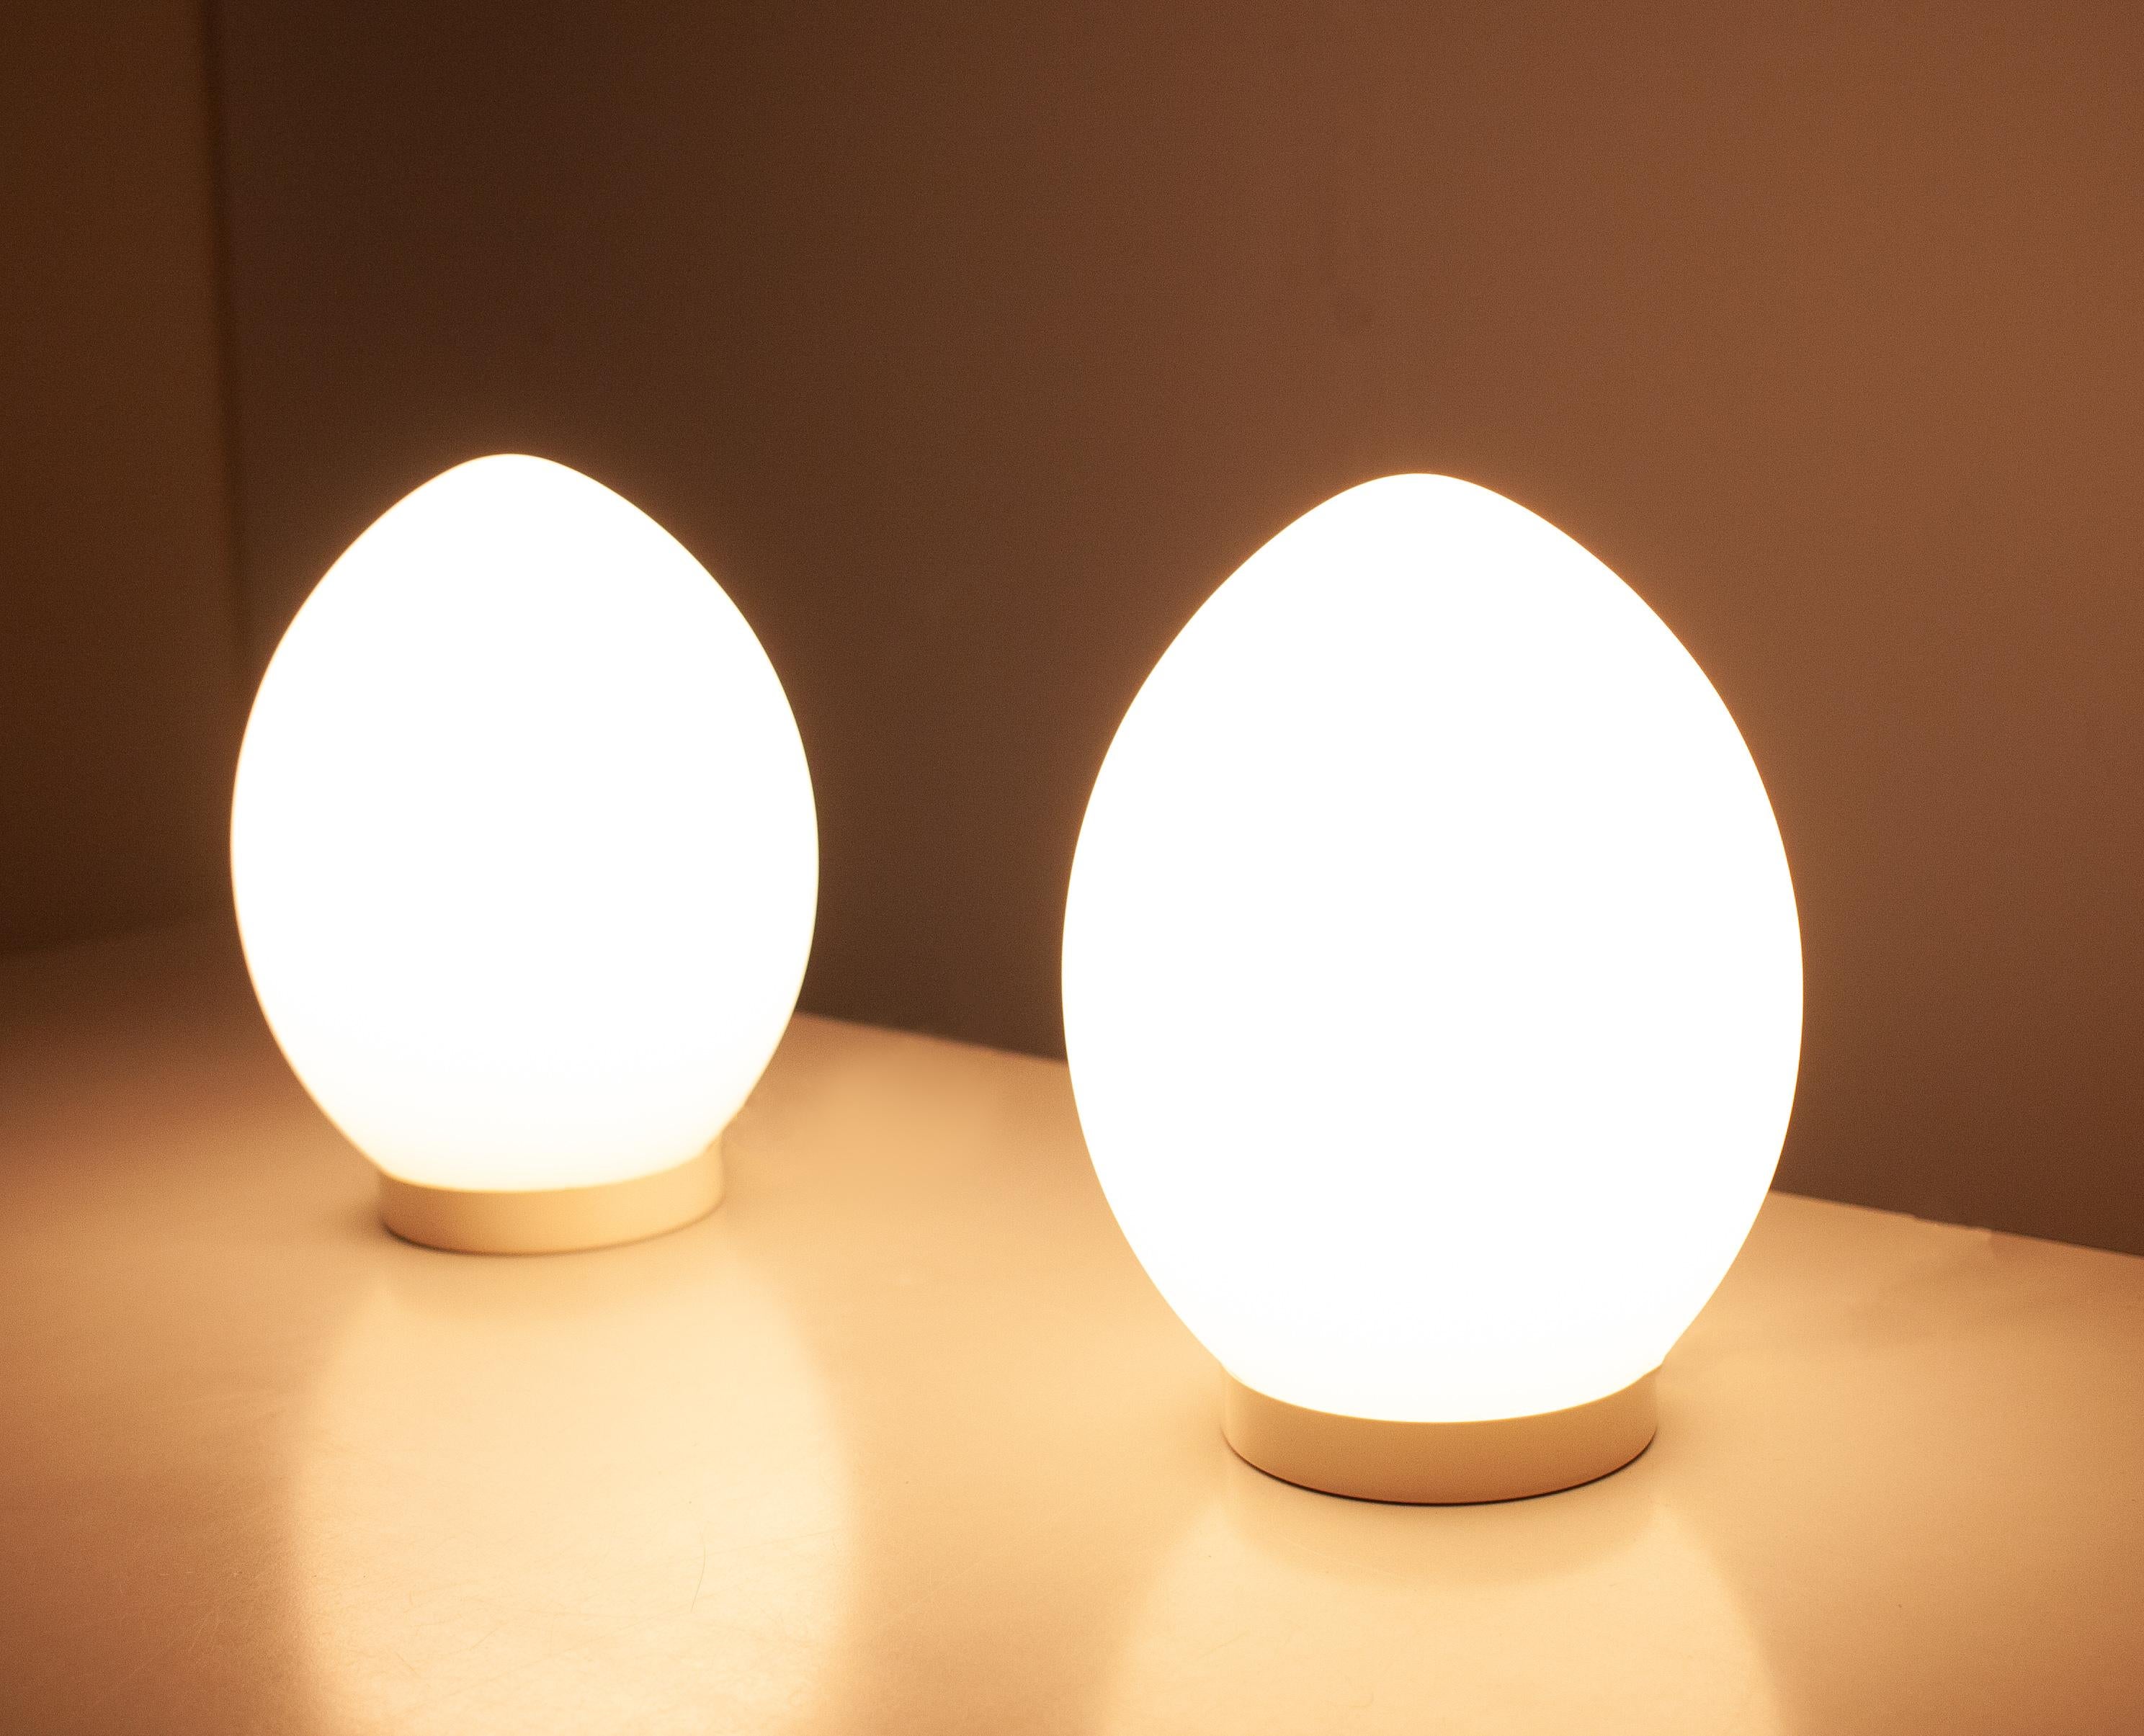 Two beautiful egg-lamps by Verrerie de Vianne France, the sober and simple shape made this design
so strong. Hand blown glass. Satin finished. Signed Vianne One E27 bulb each.